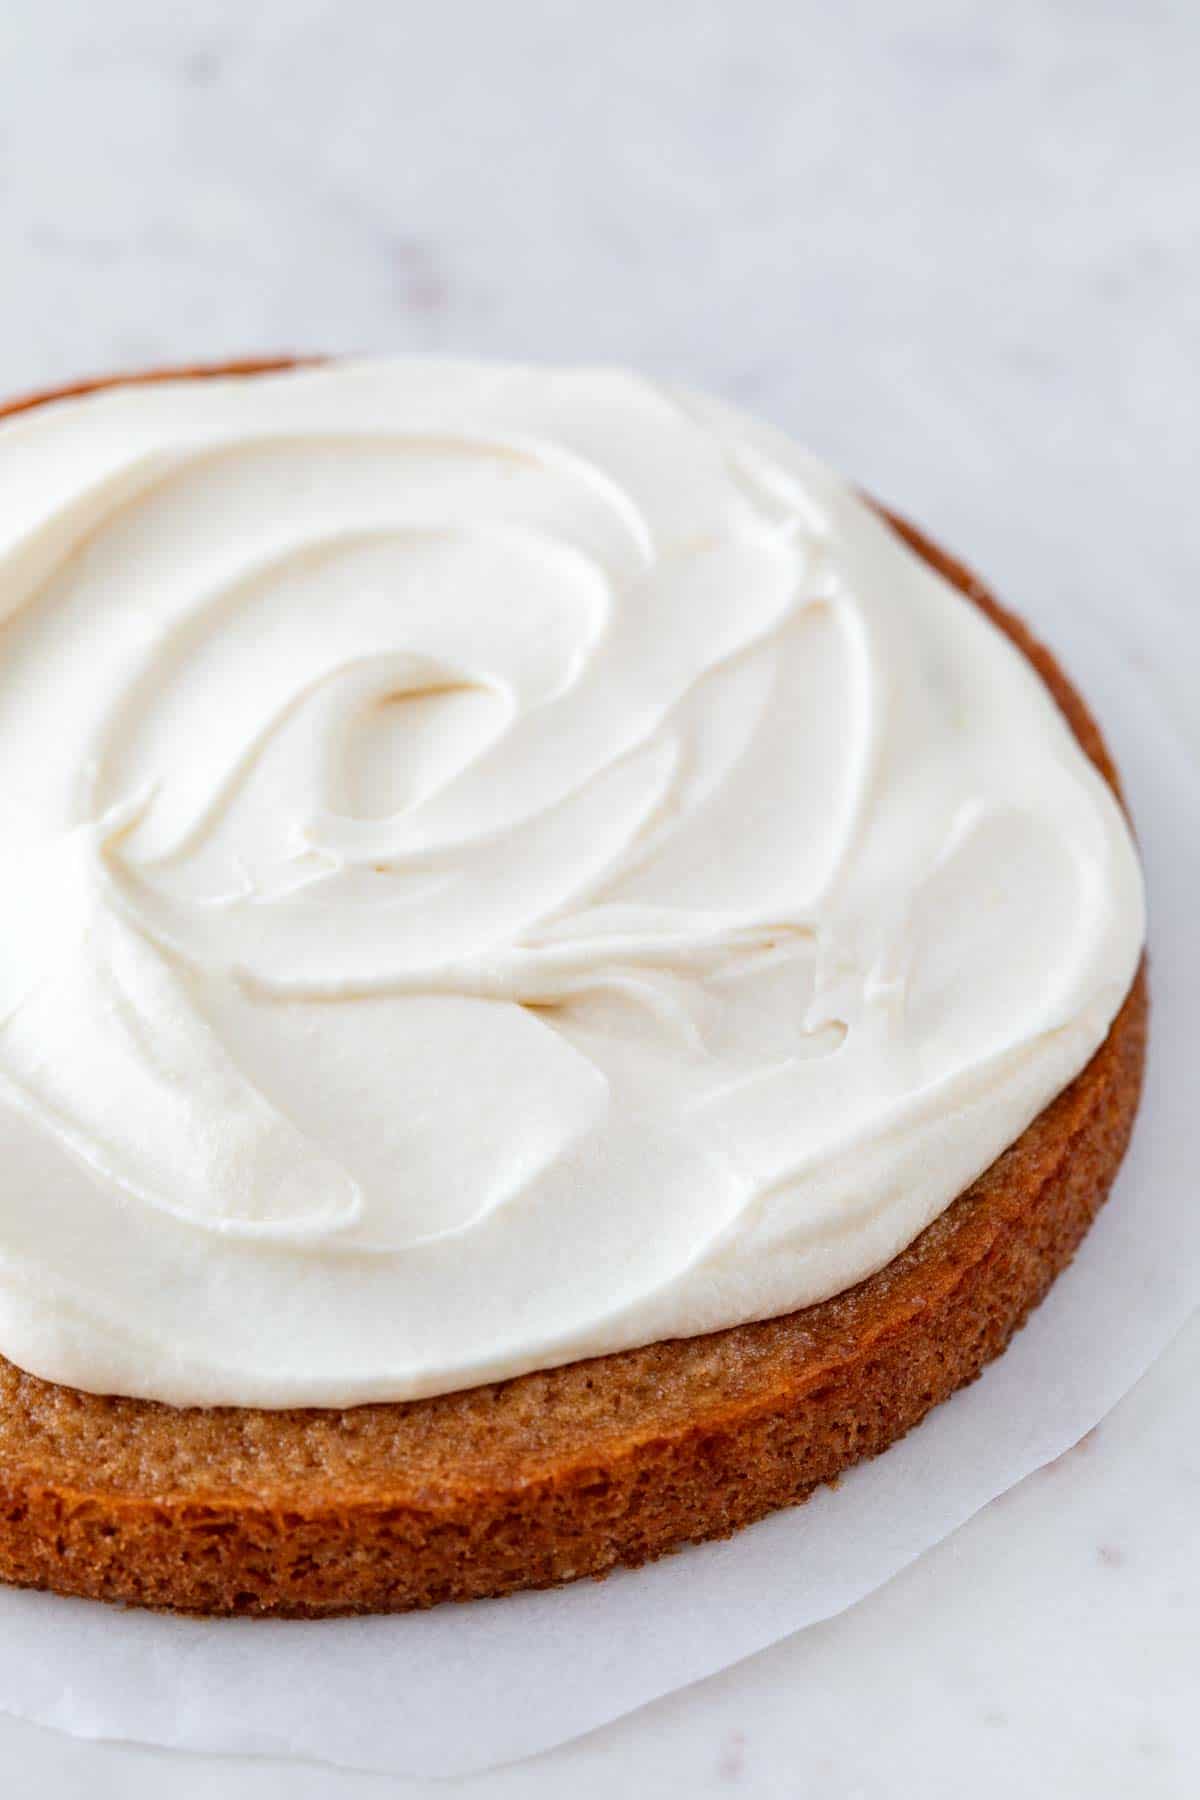 A cake with vegan cream cheese frosting on top.